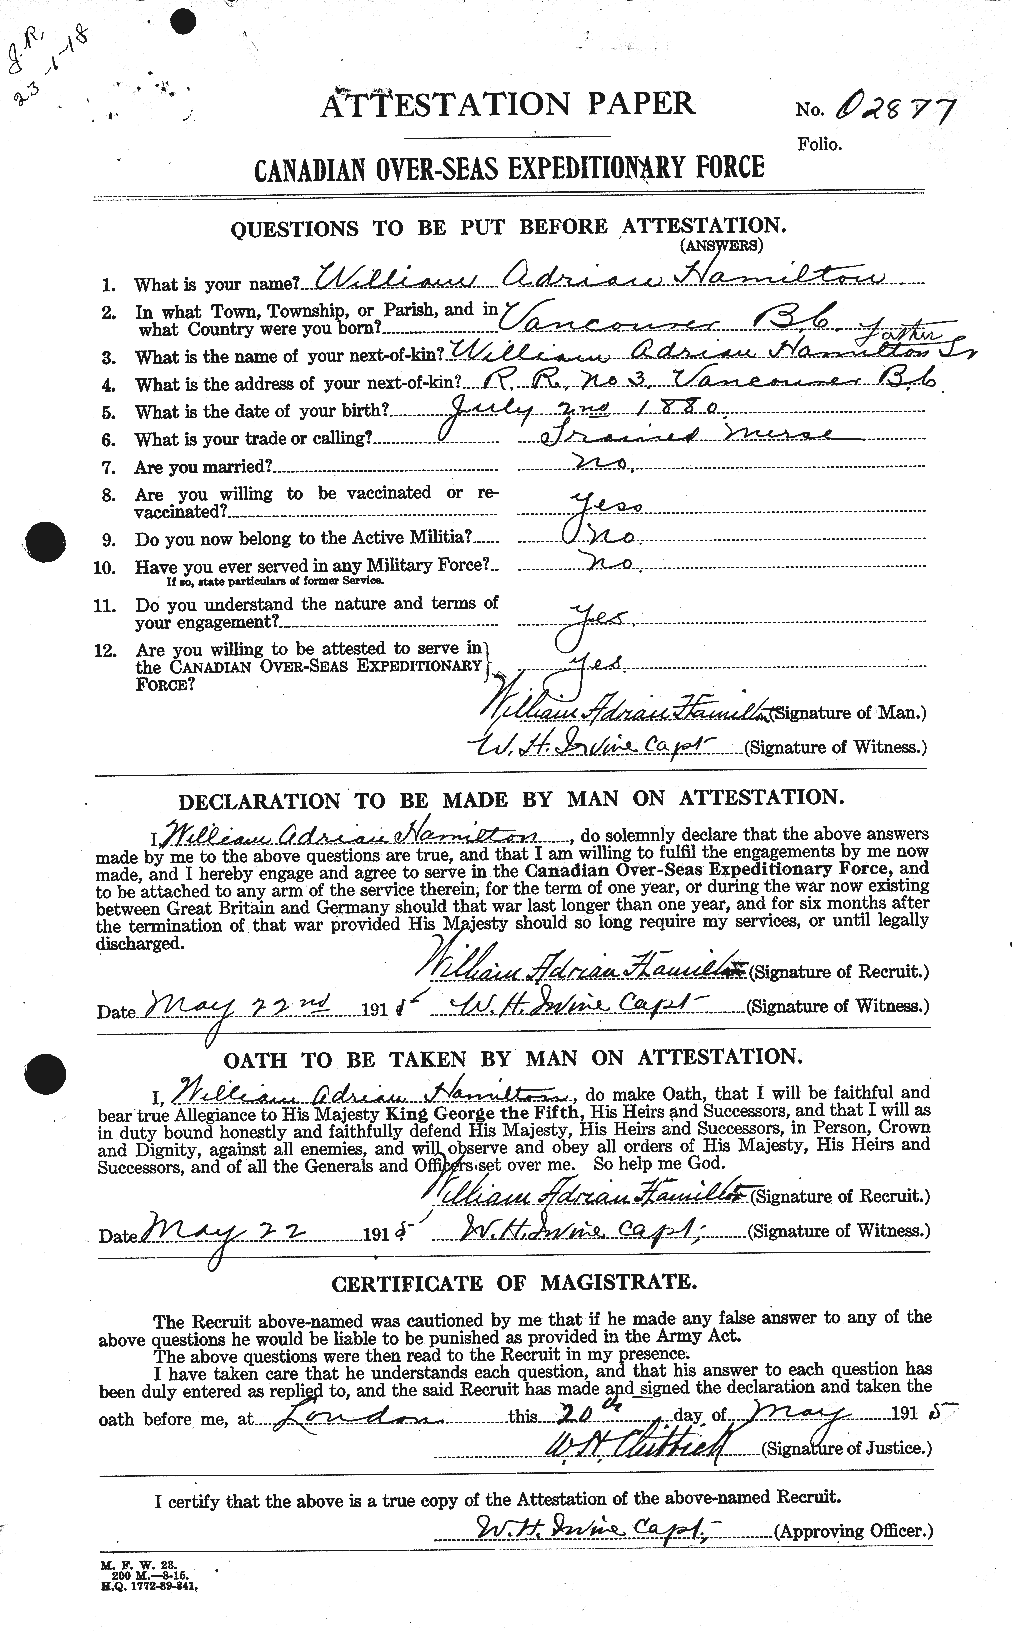 Personnel Records of the First World War - CEF 374872a